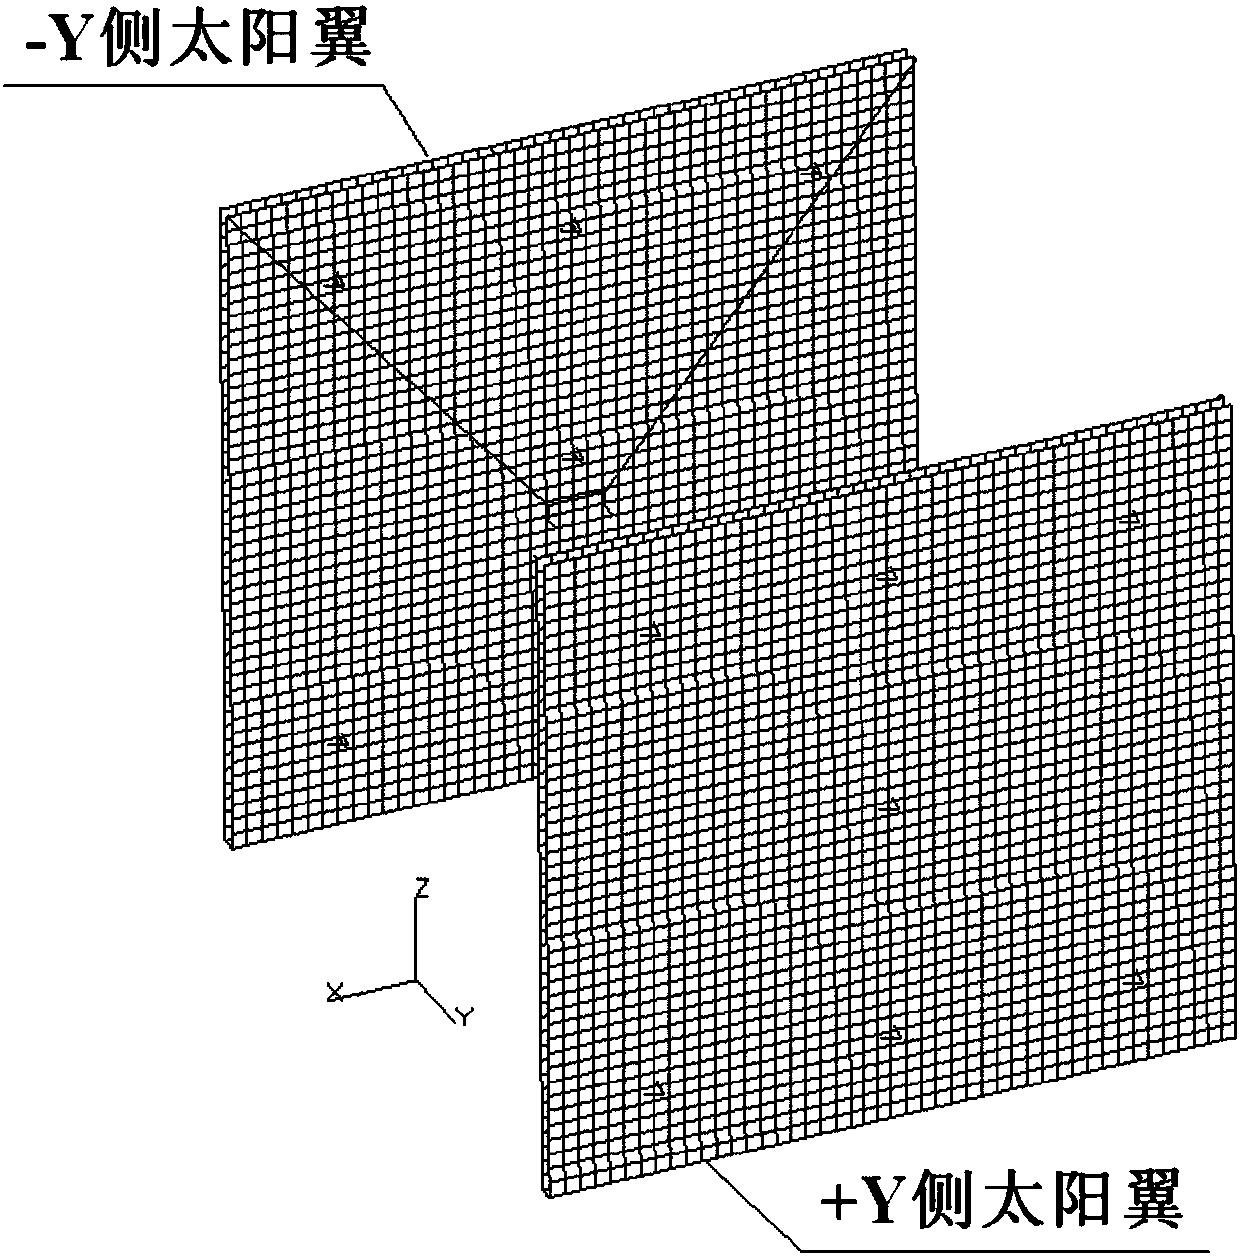 Secondary polycondensation method of finite element model of spacecraft